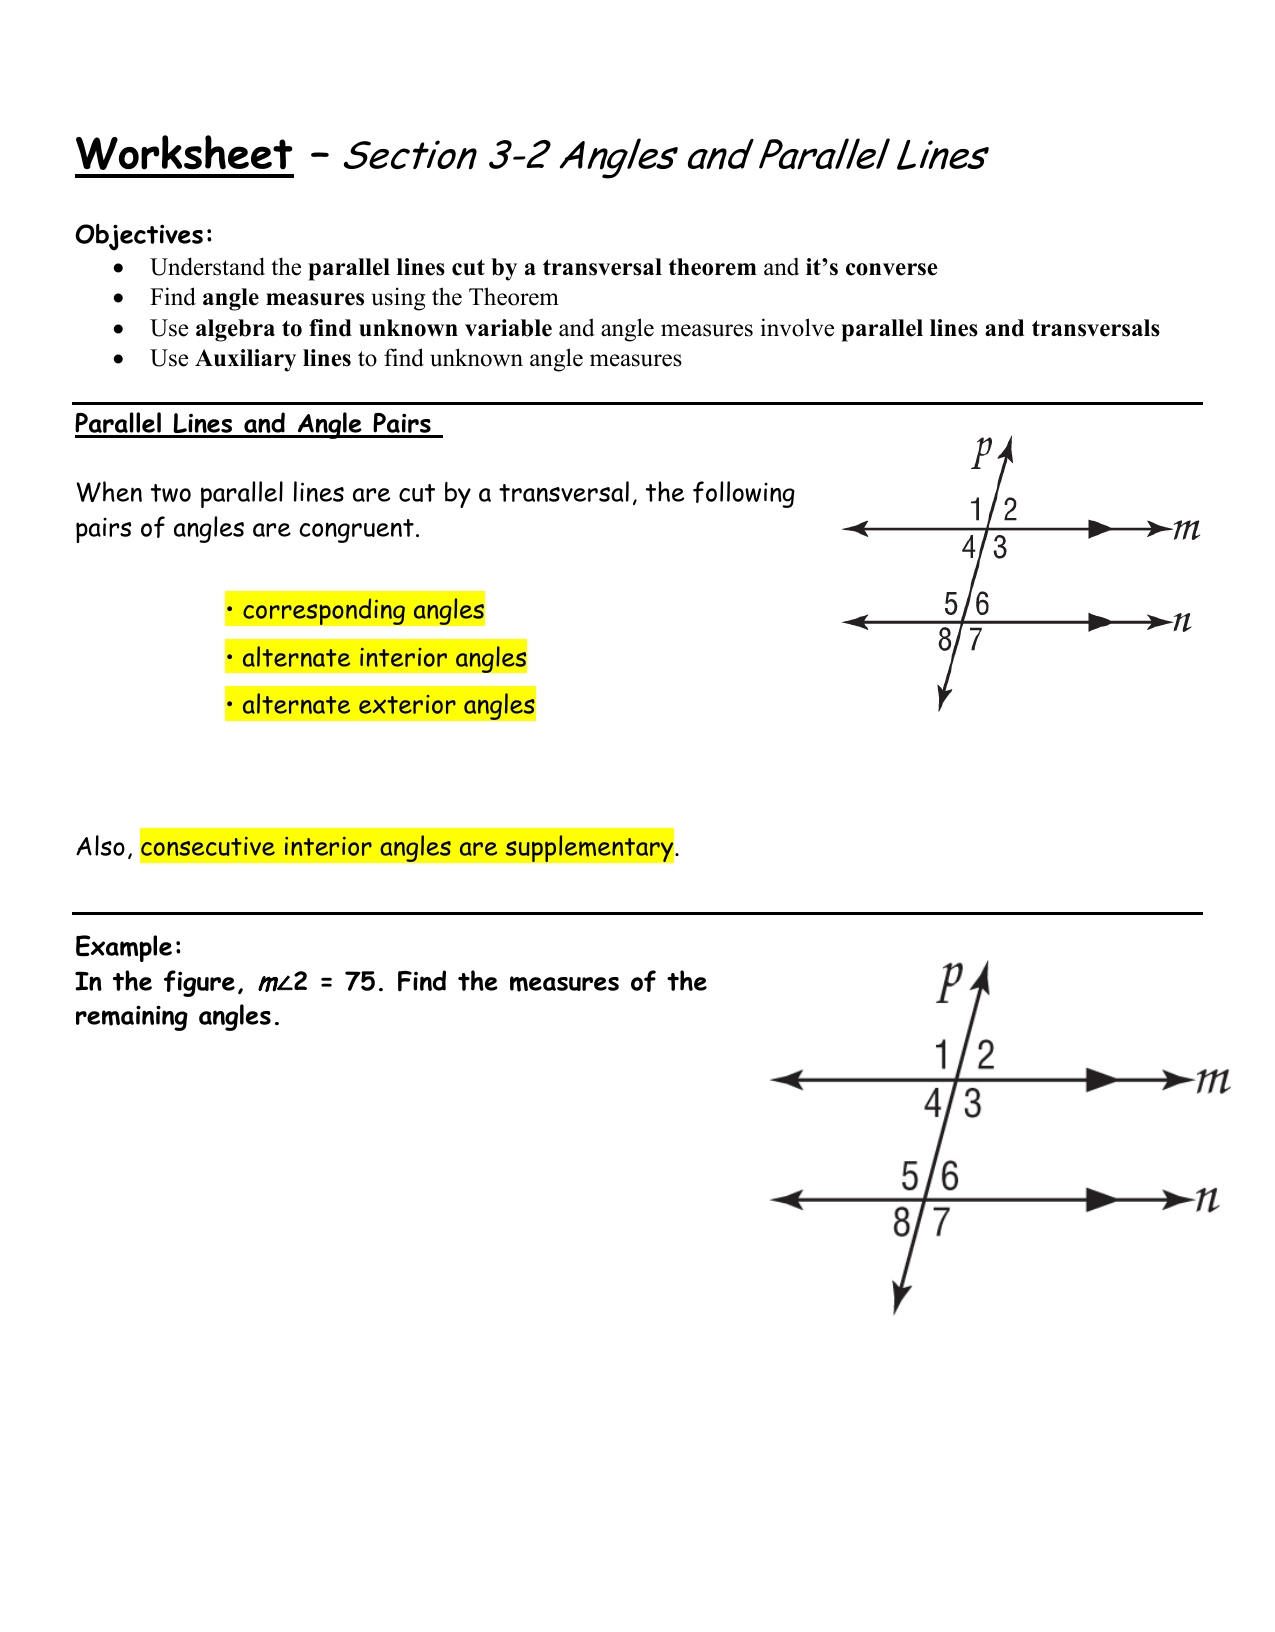 Worksheet Section 11 Angles and Parallel Lines Inside Angles And Parallel Lines Worksheet